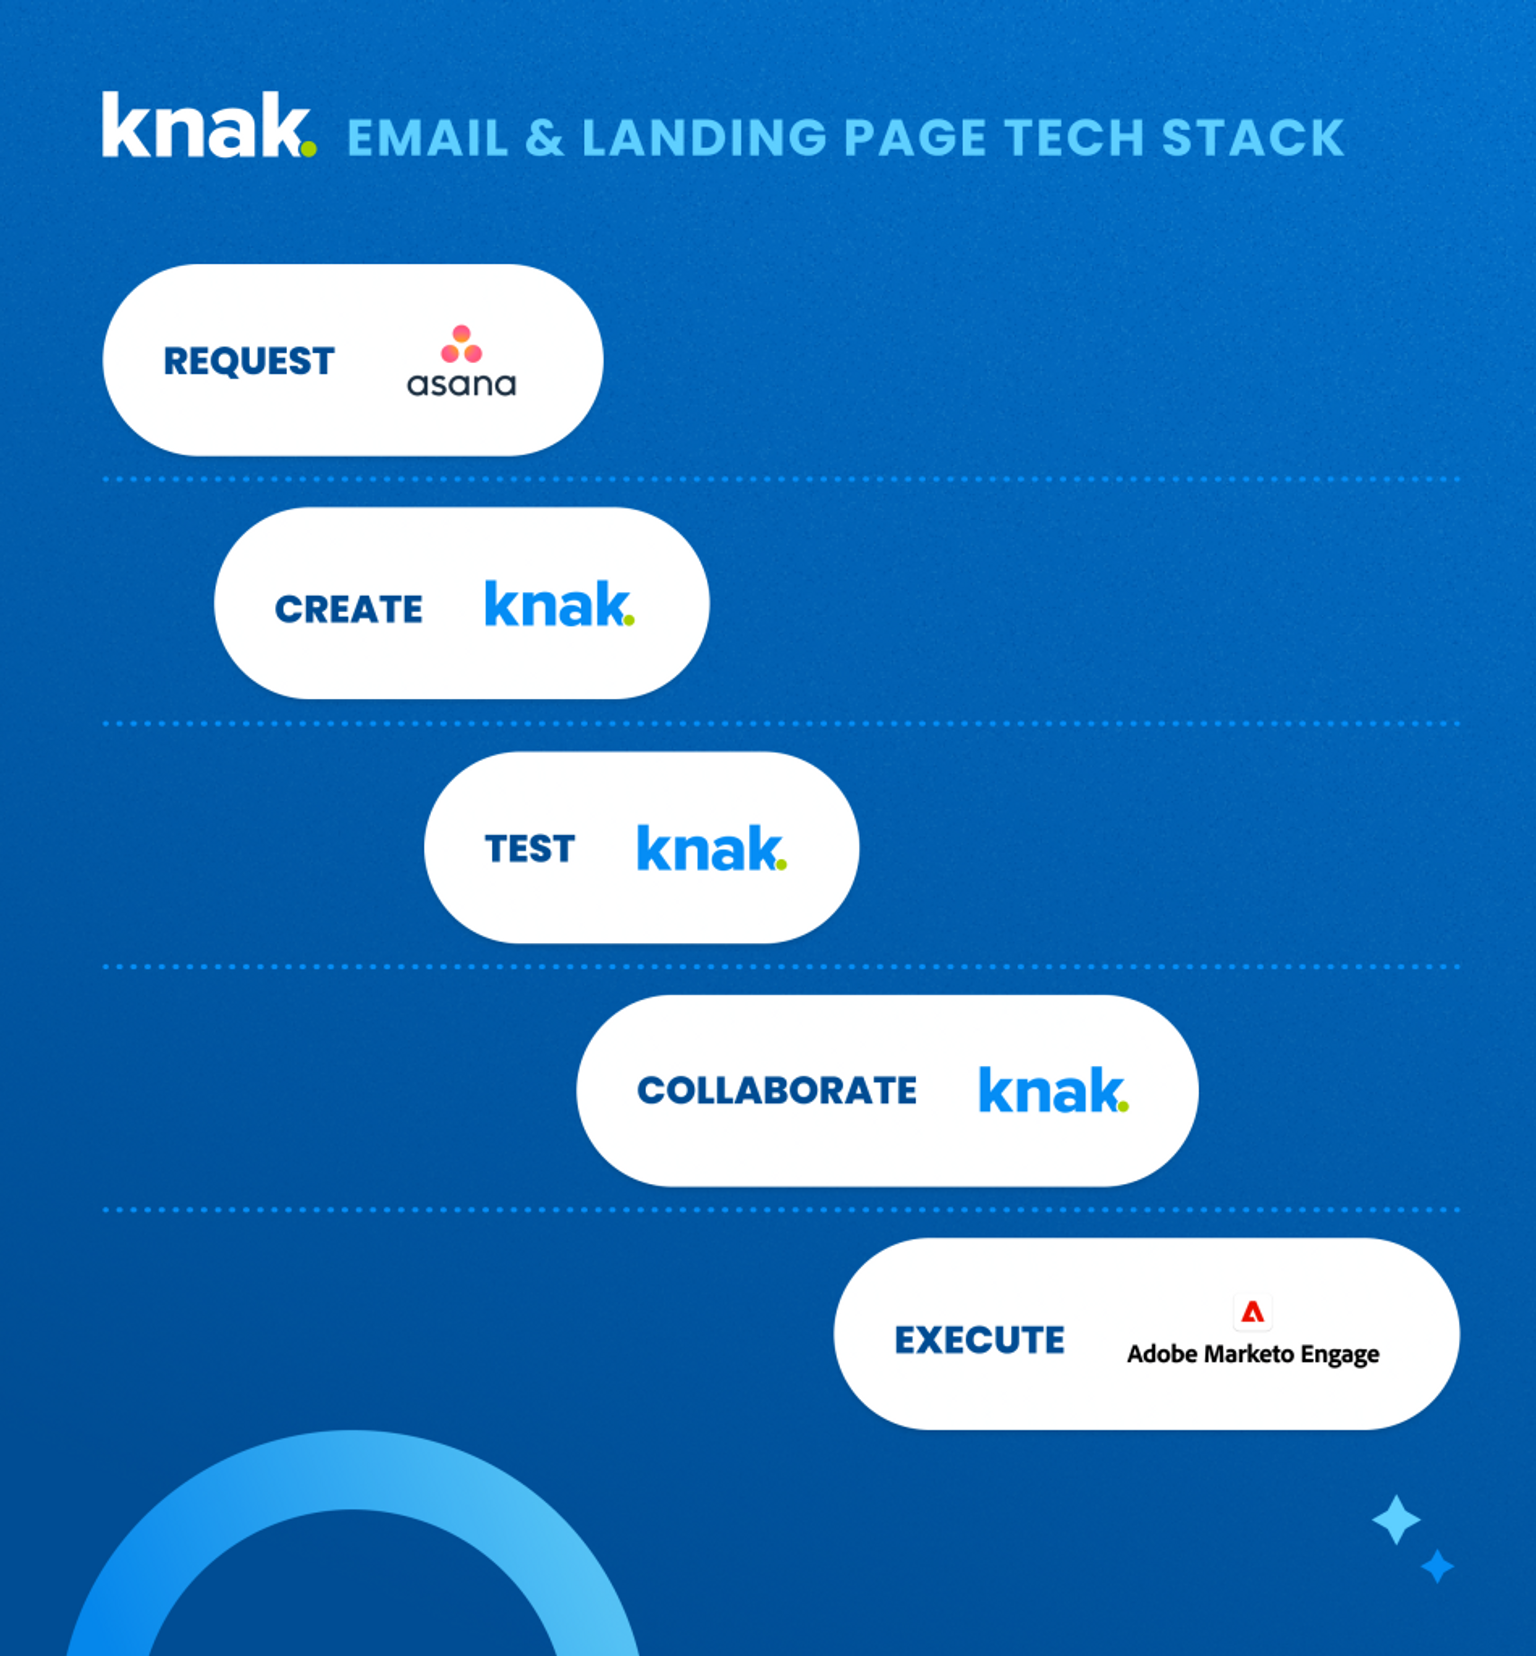 Knak Blog Email and Landing Page Tech Stack